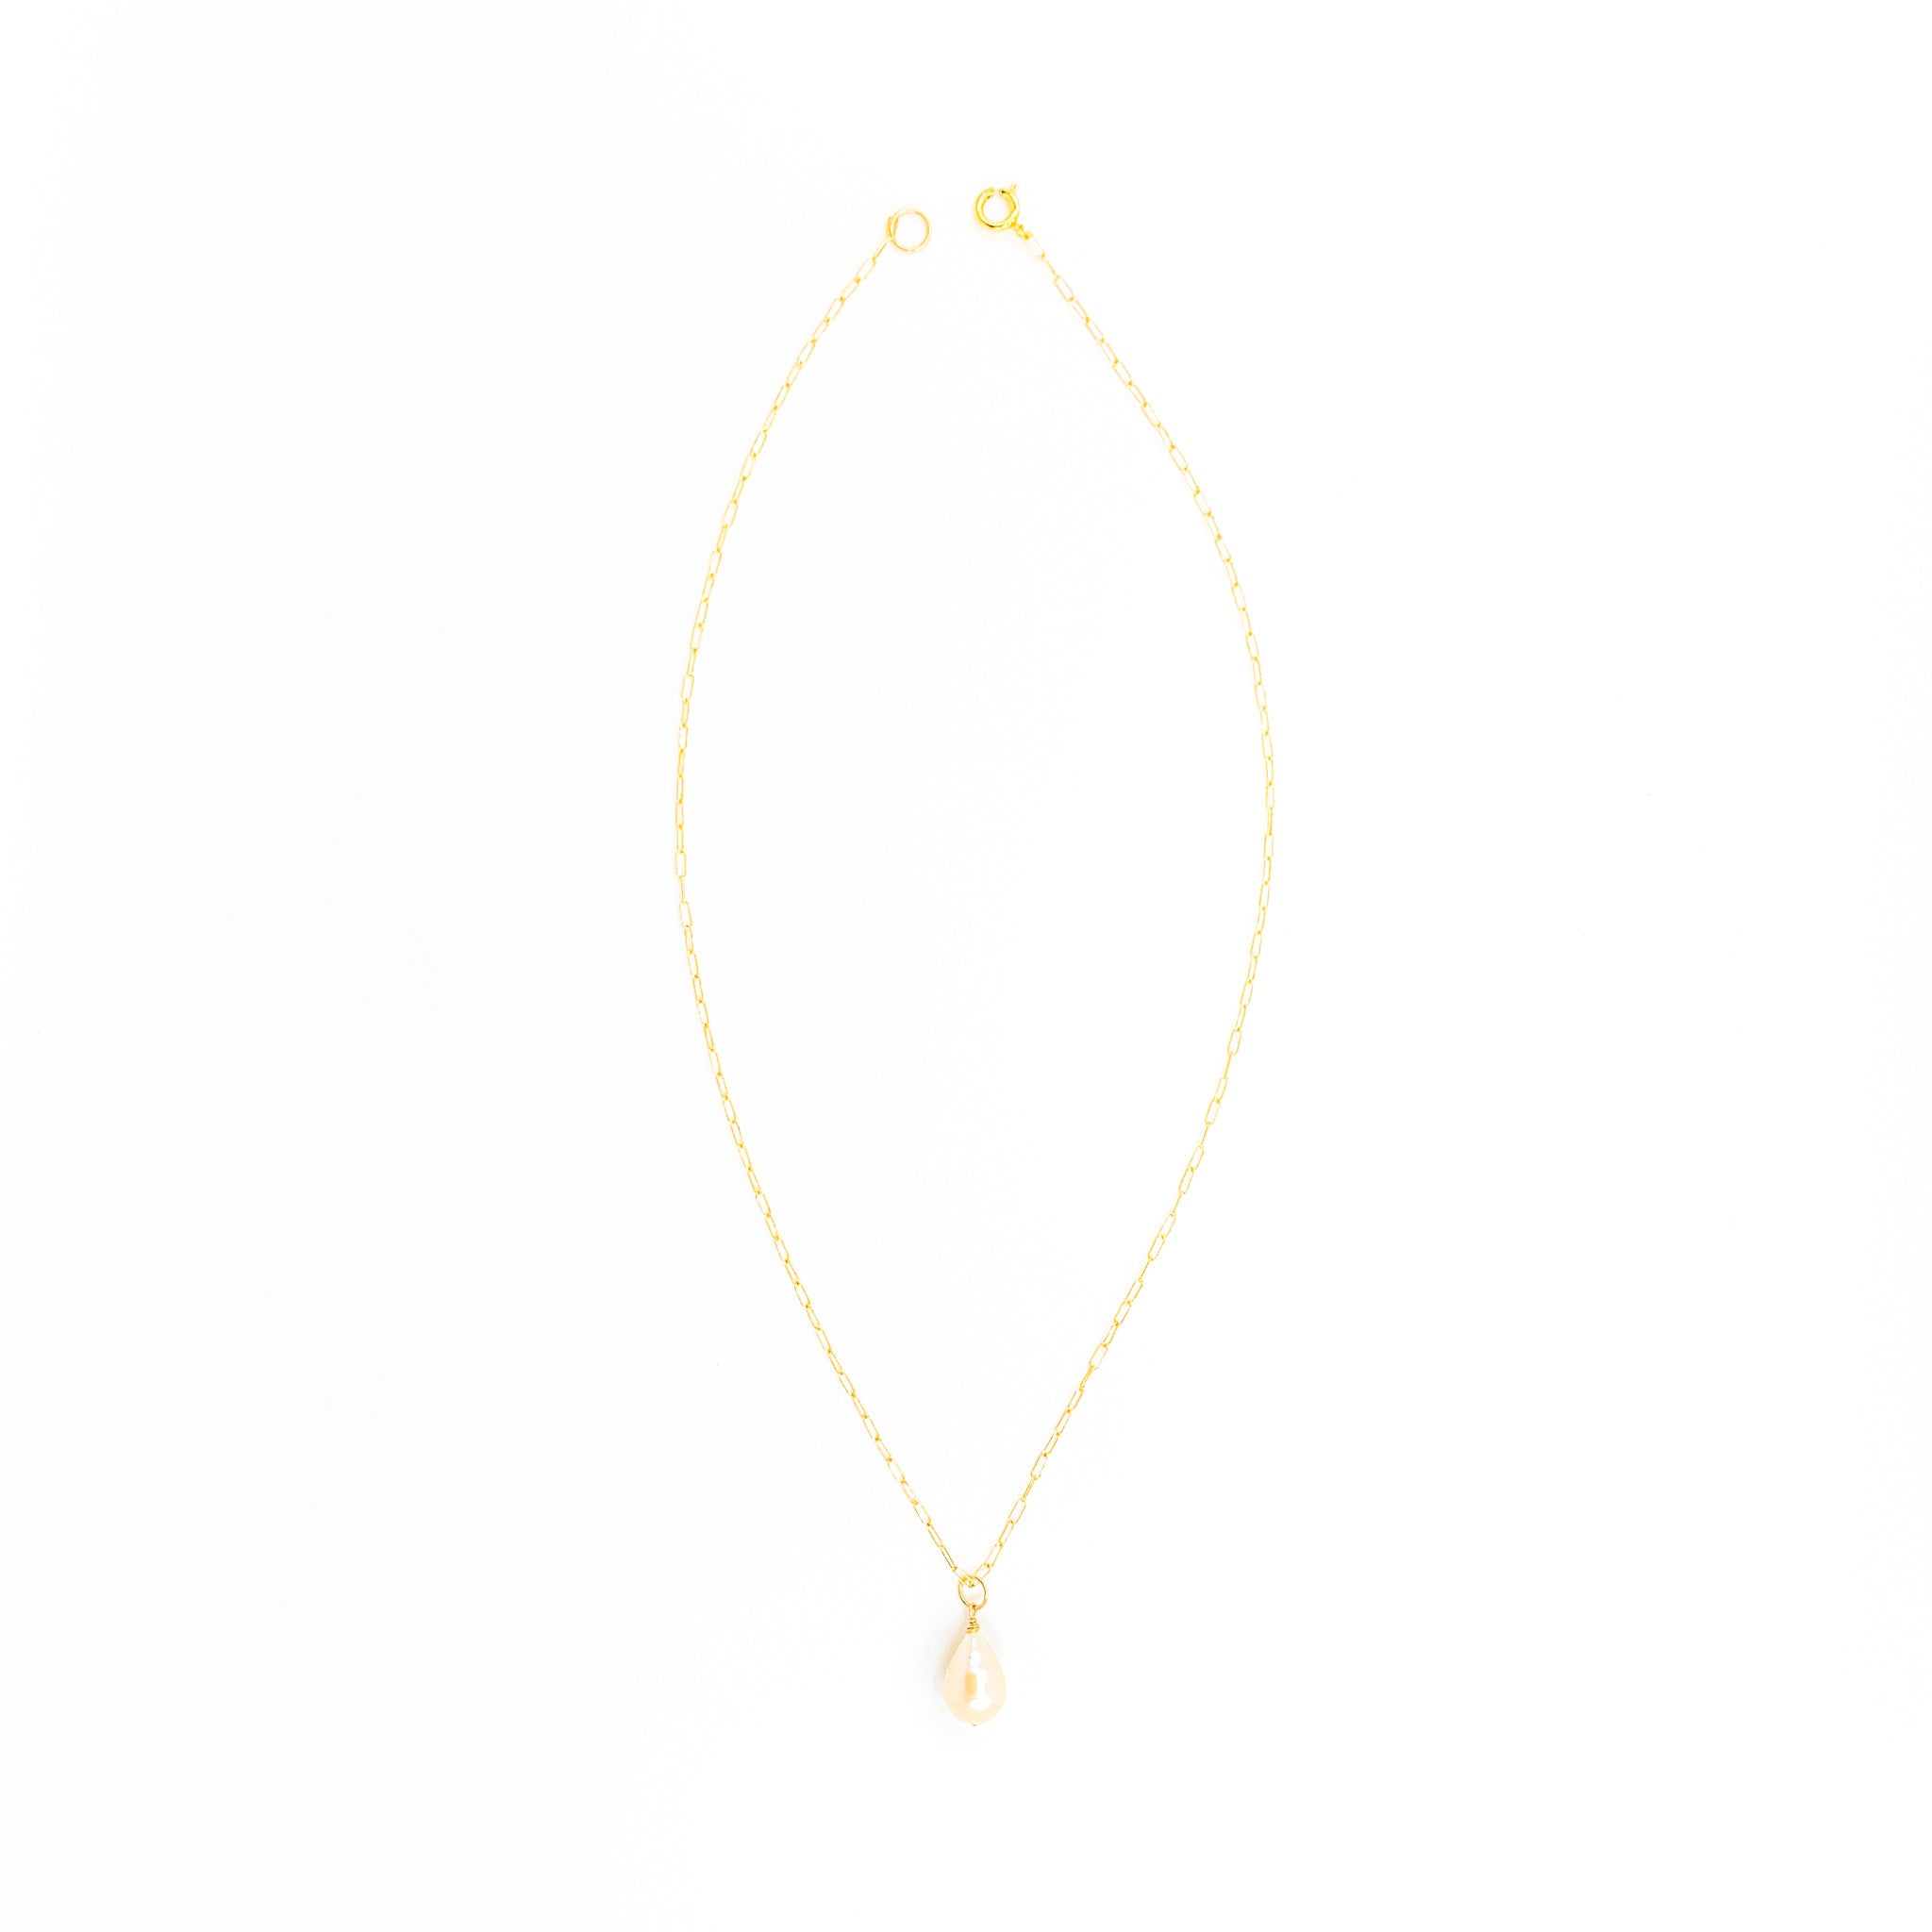 simple gold chain white drop shape pearl necklace by eve black jewelry made in Hawaii  Edit alt text